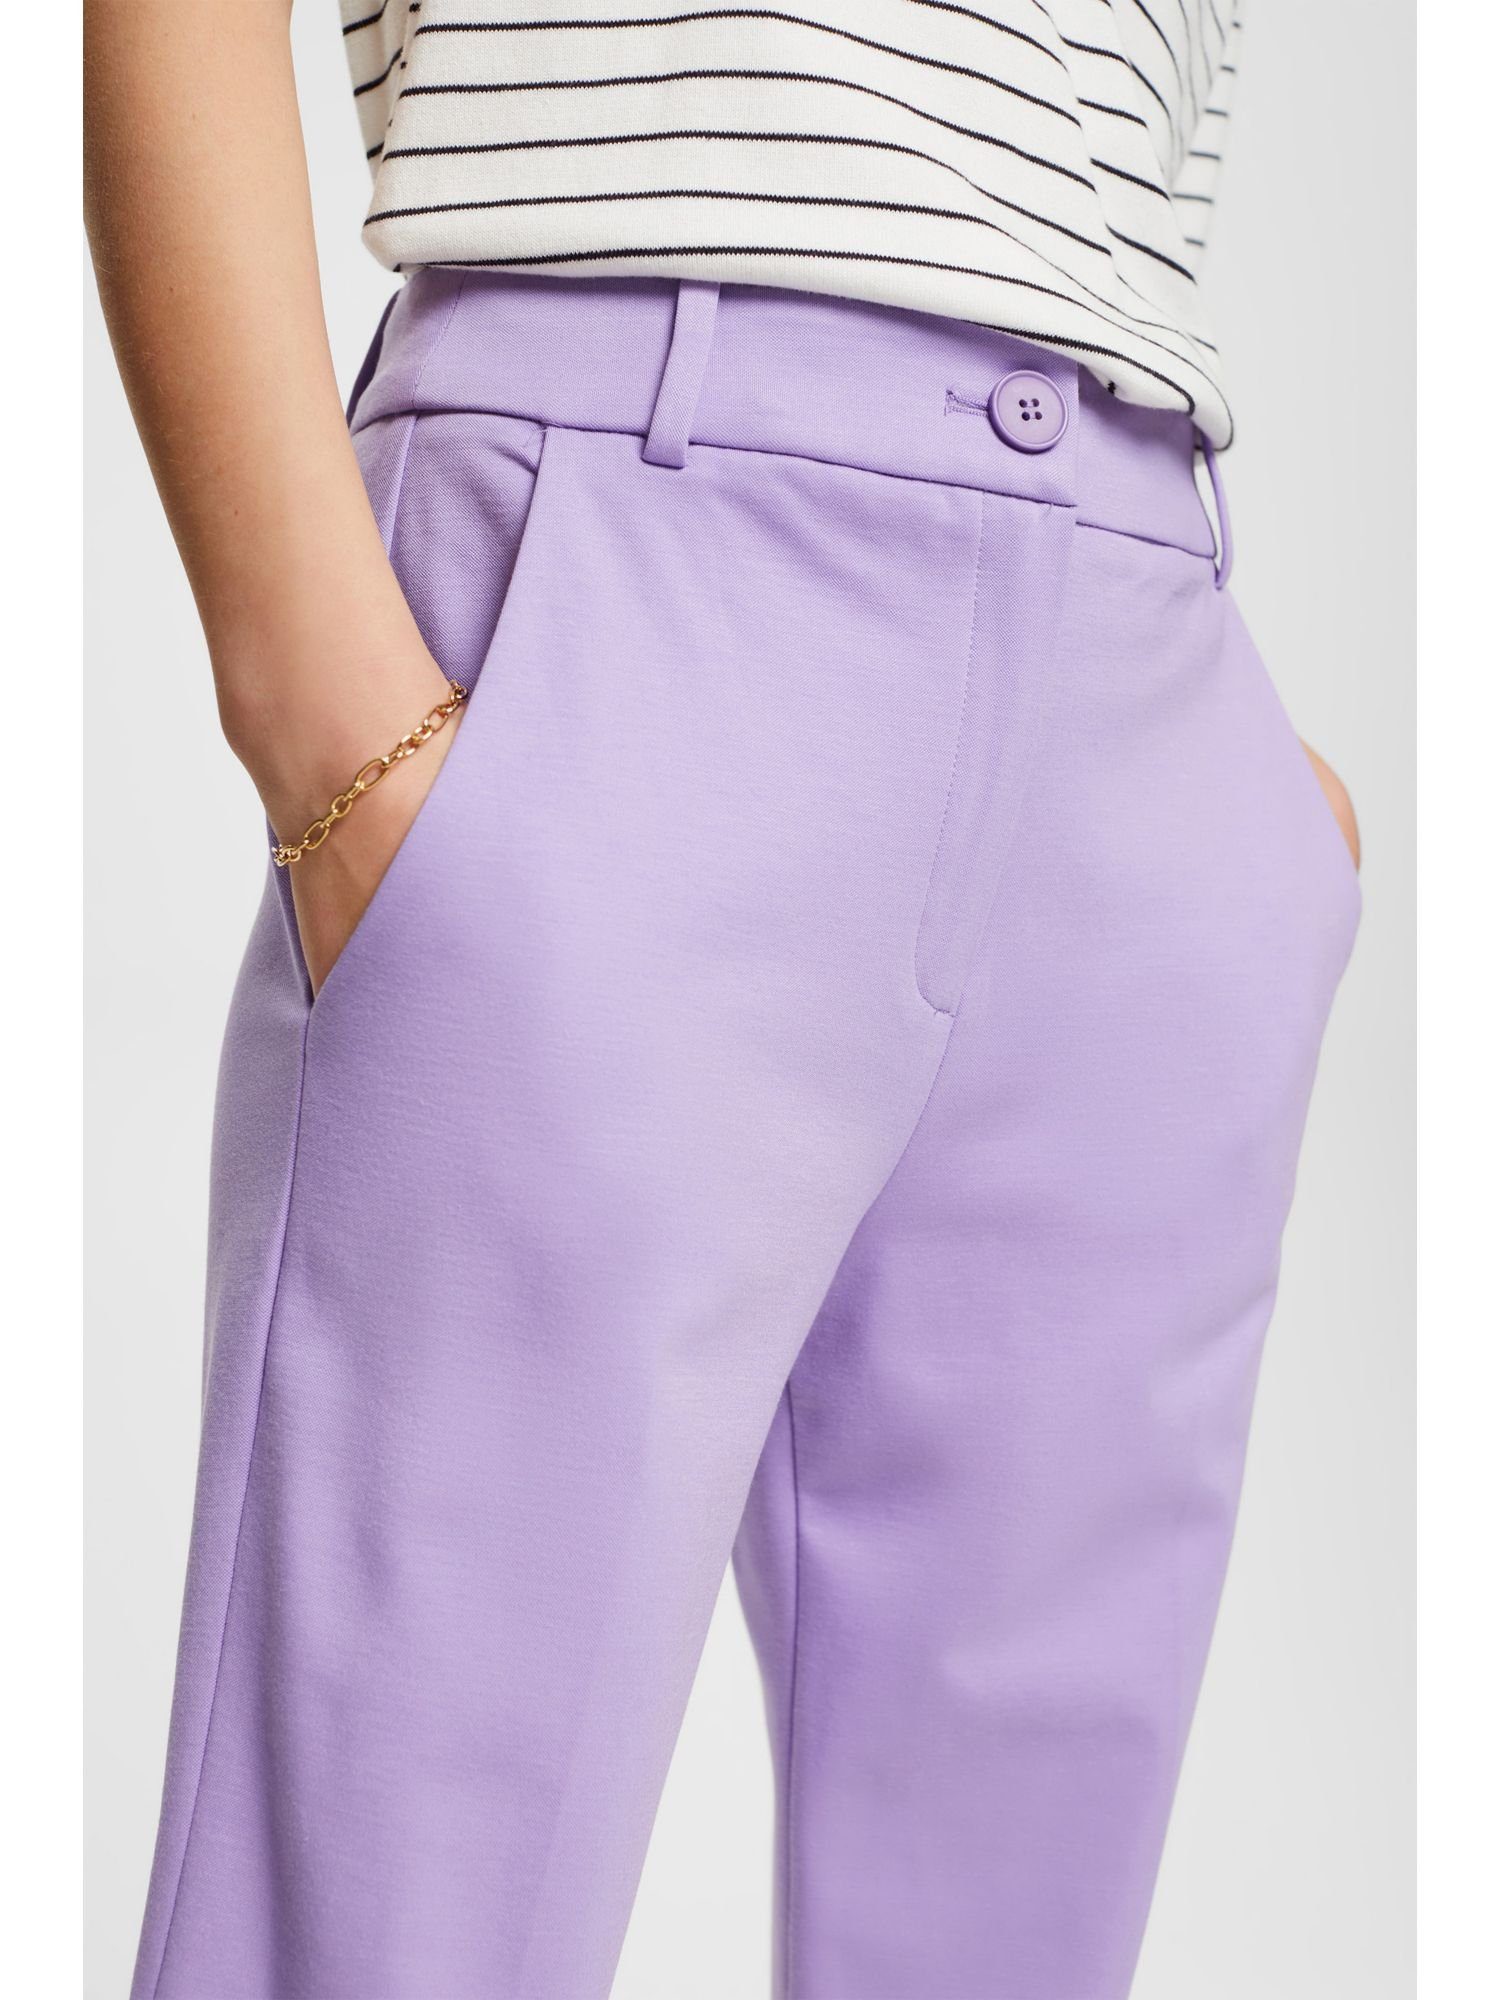 & Match Stretch-Hose Pants LAVENDER PUNTO Collection Mix Tapered SPORTY Esprit